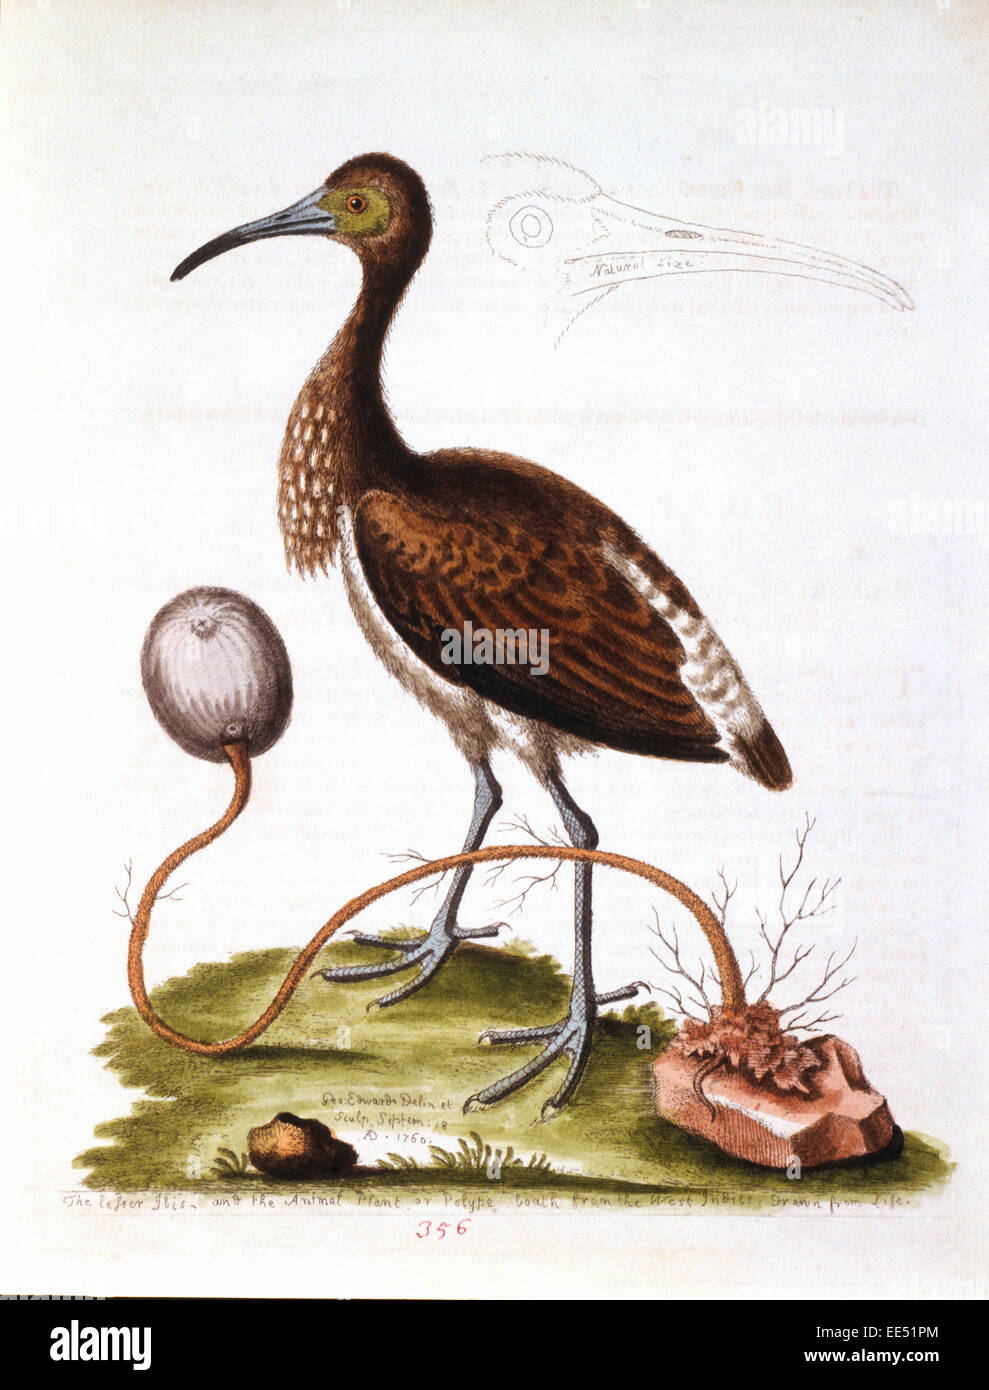 The Lesser Ibis, and the Animal Plant, or Polype, both from the West Indies, Drawing by George Edwards, 1760 Stock Photo